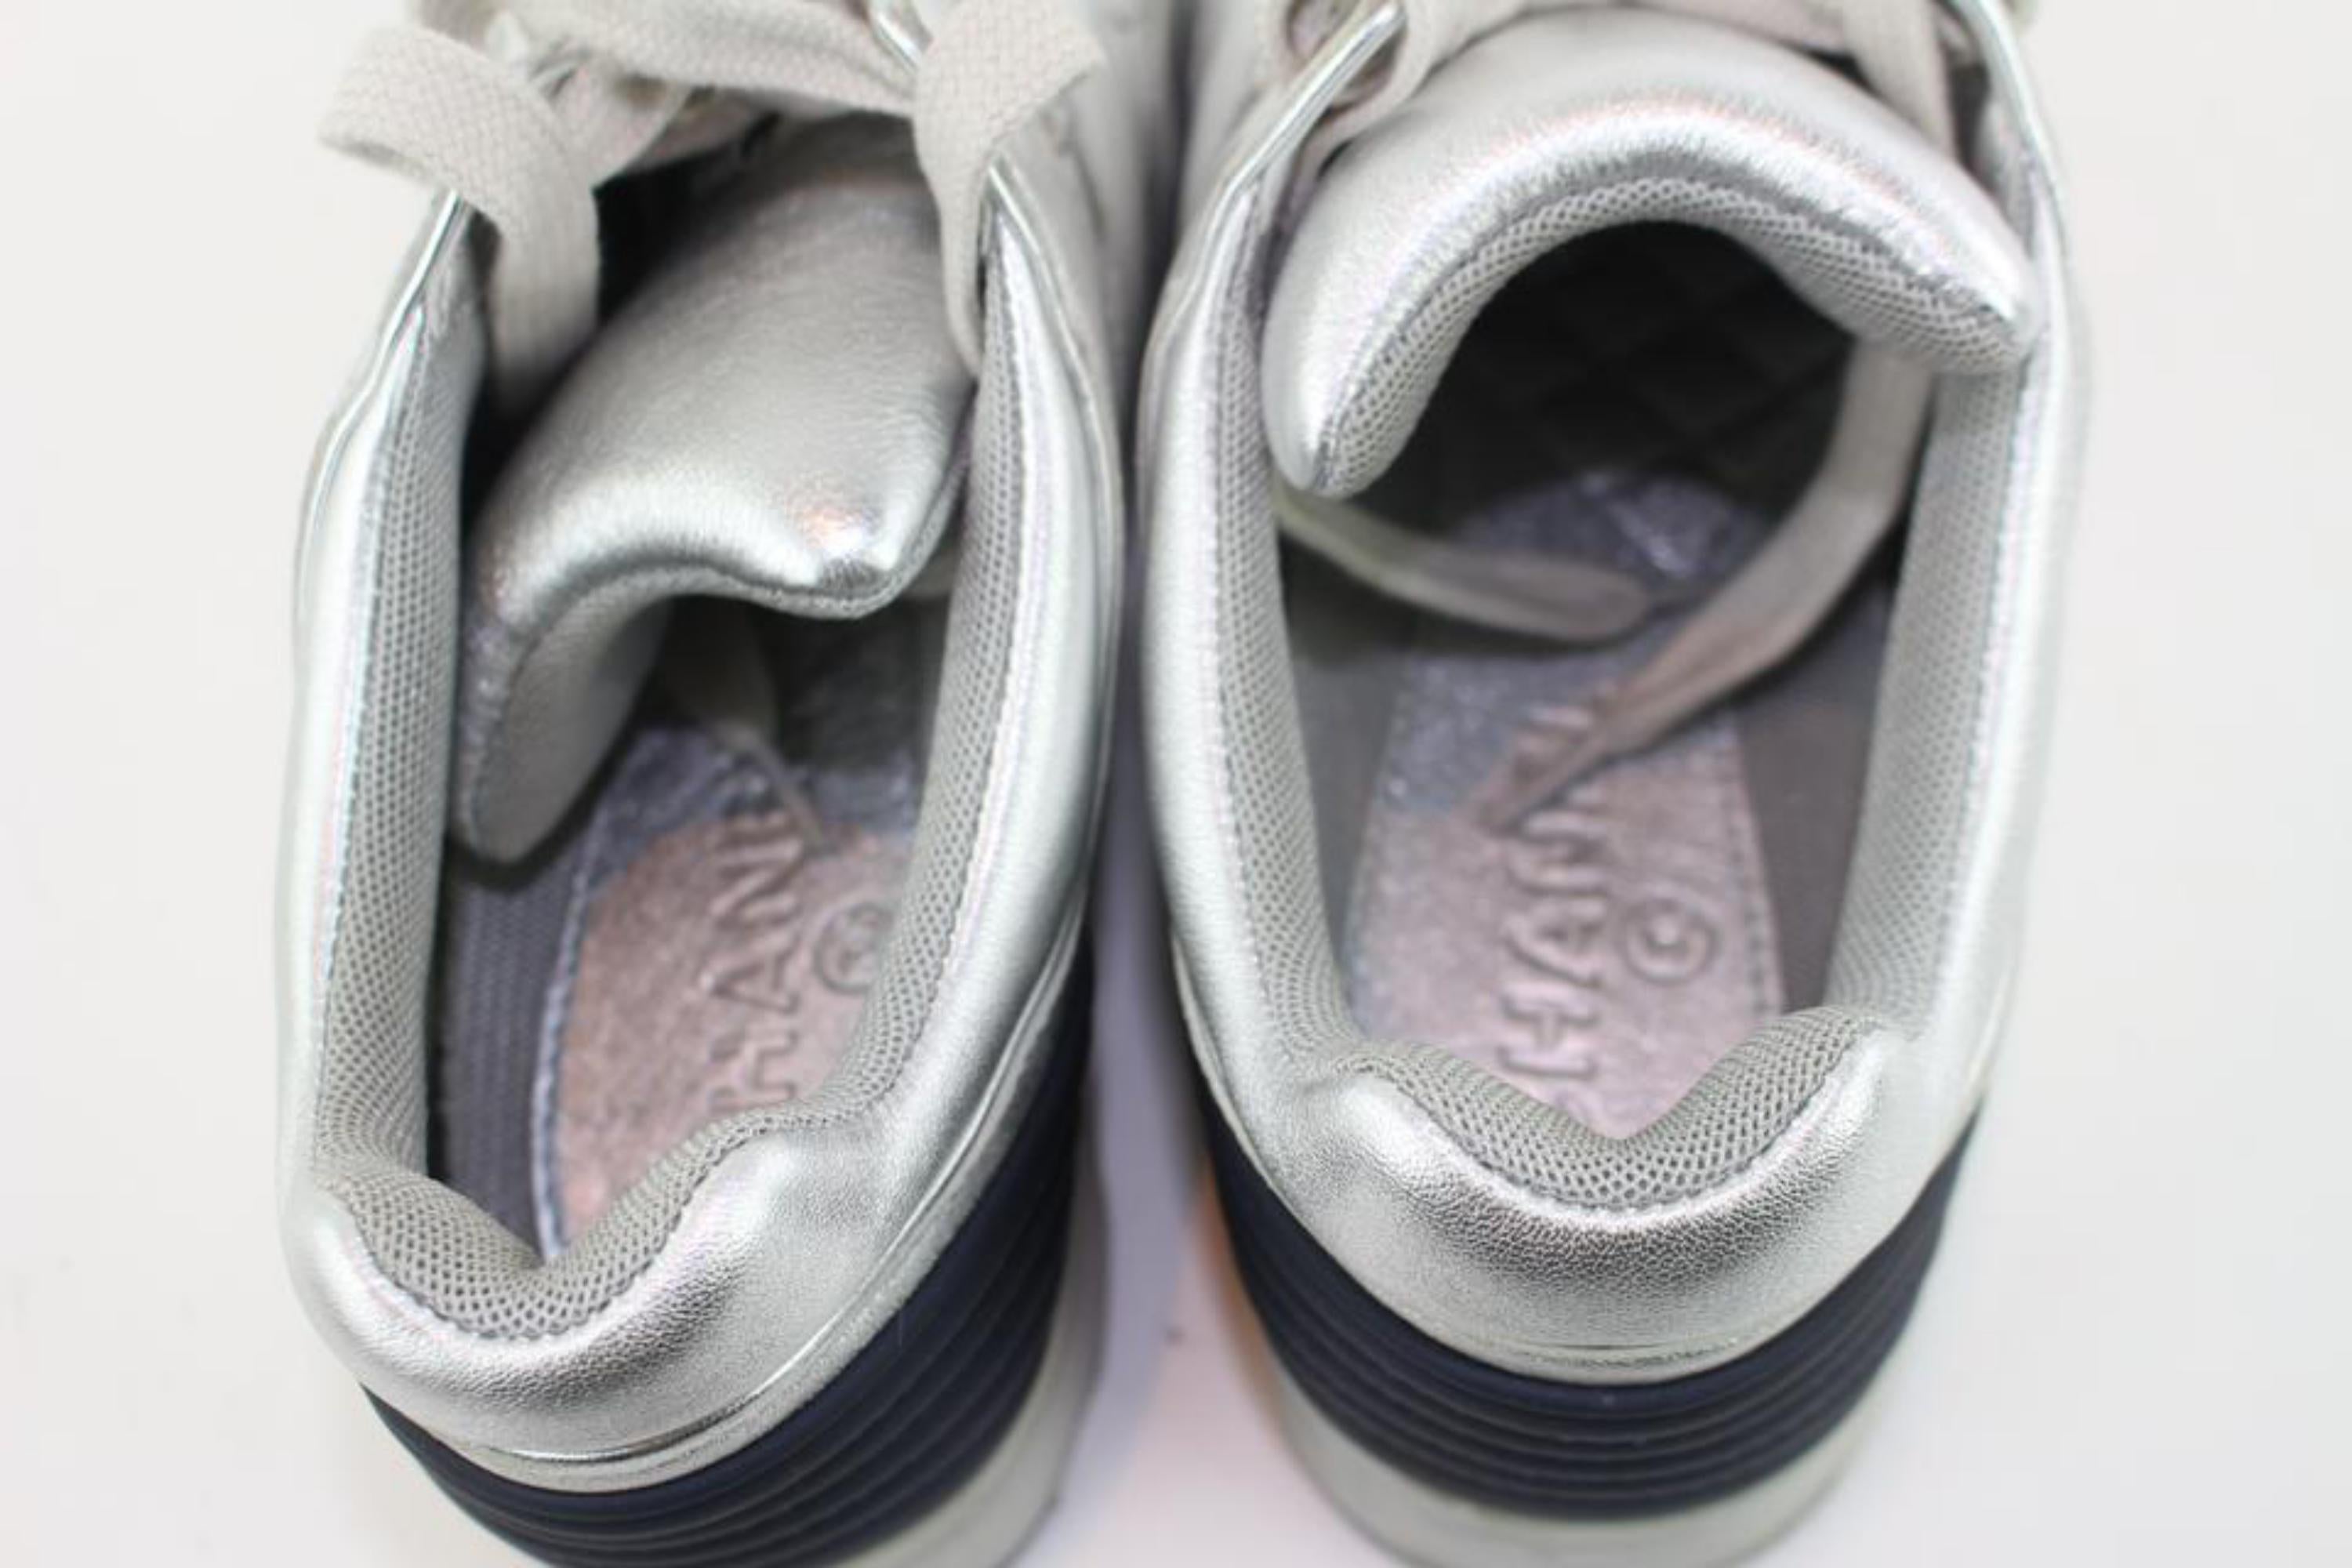 Chanel Silver 16s Metallic Bicolor Trainer 1cz1005 Sneakers For Sale 3